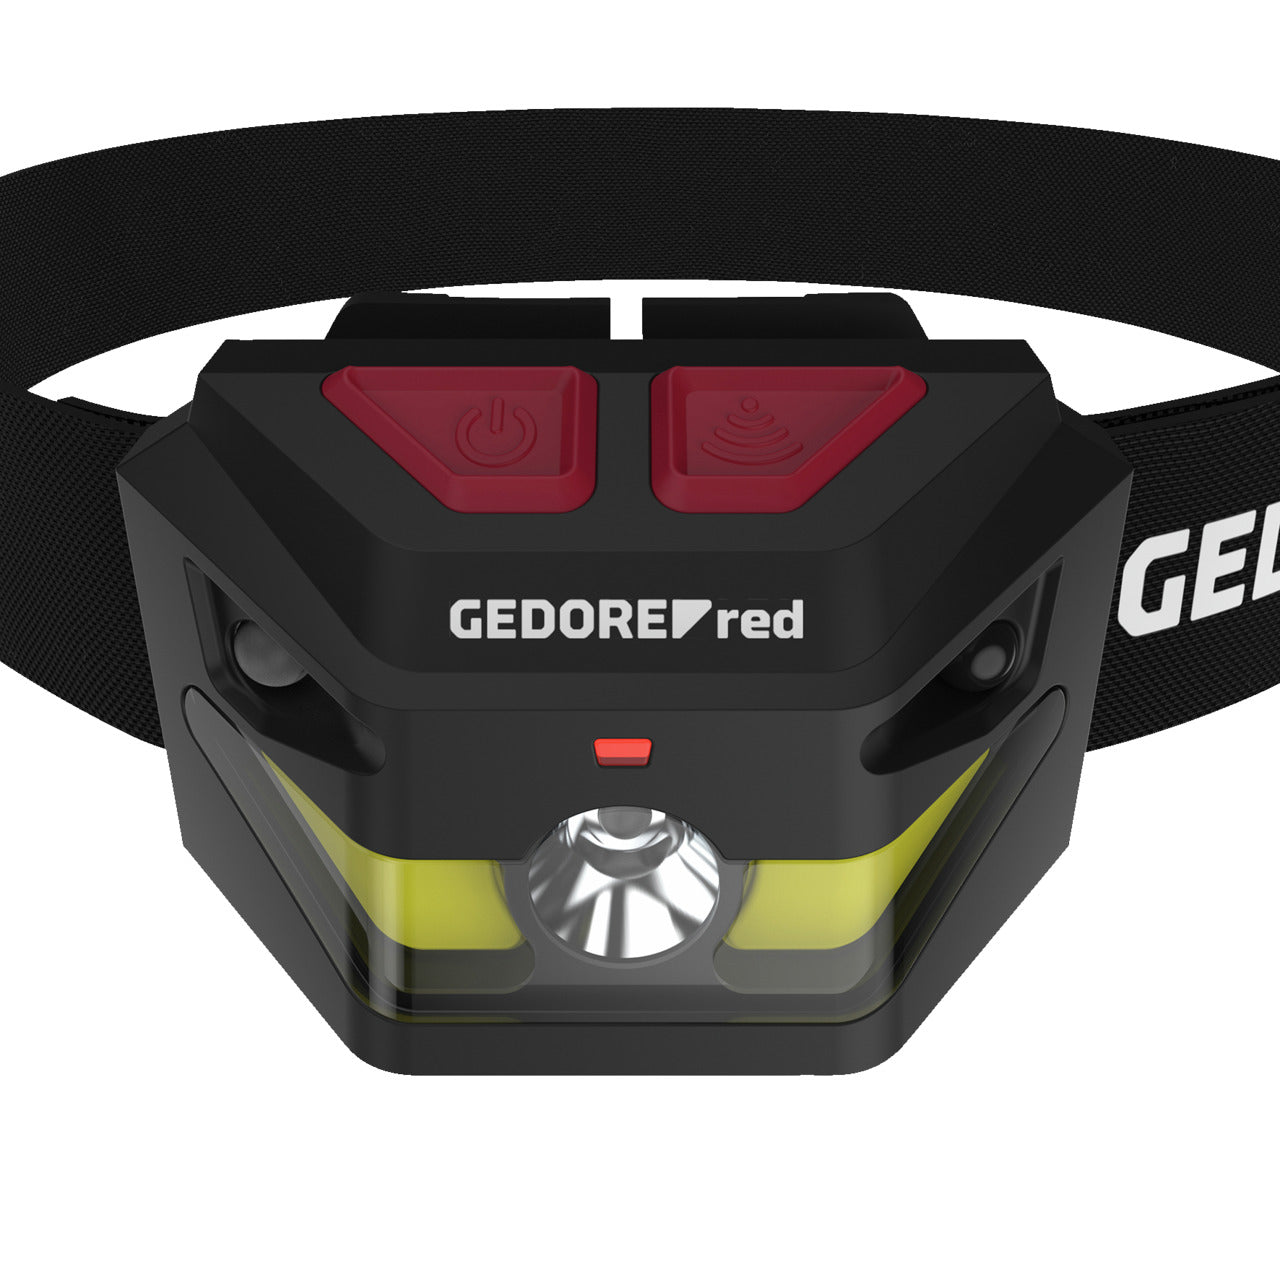 GEDOREred R95500058 - Front (3301762)